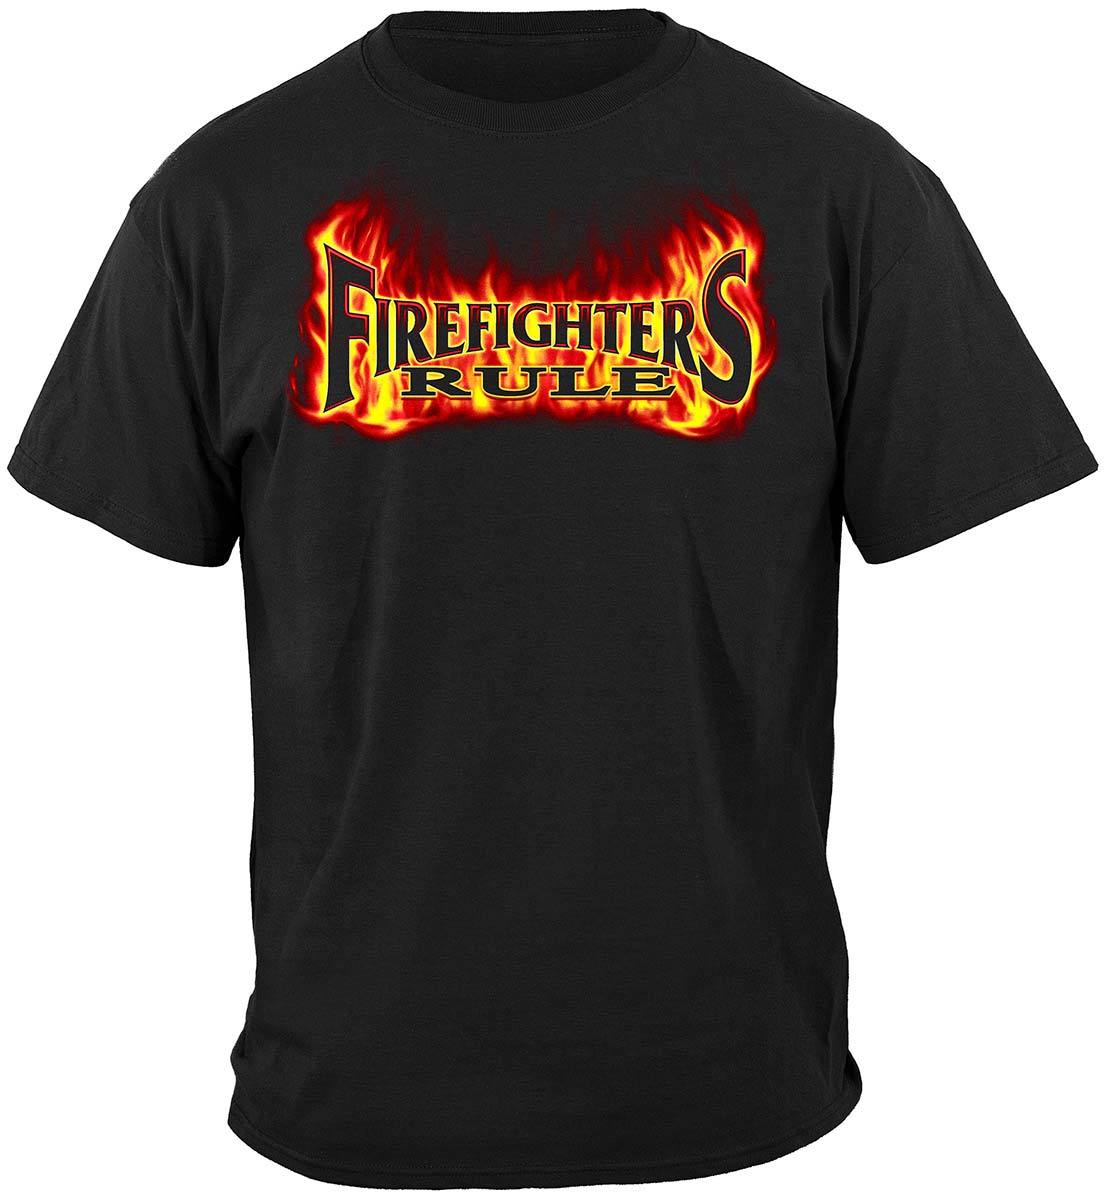 Rule Firefighters Premium T-Shirt